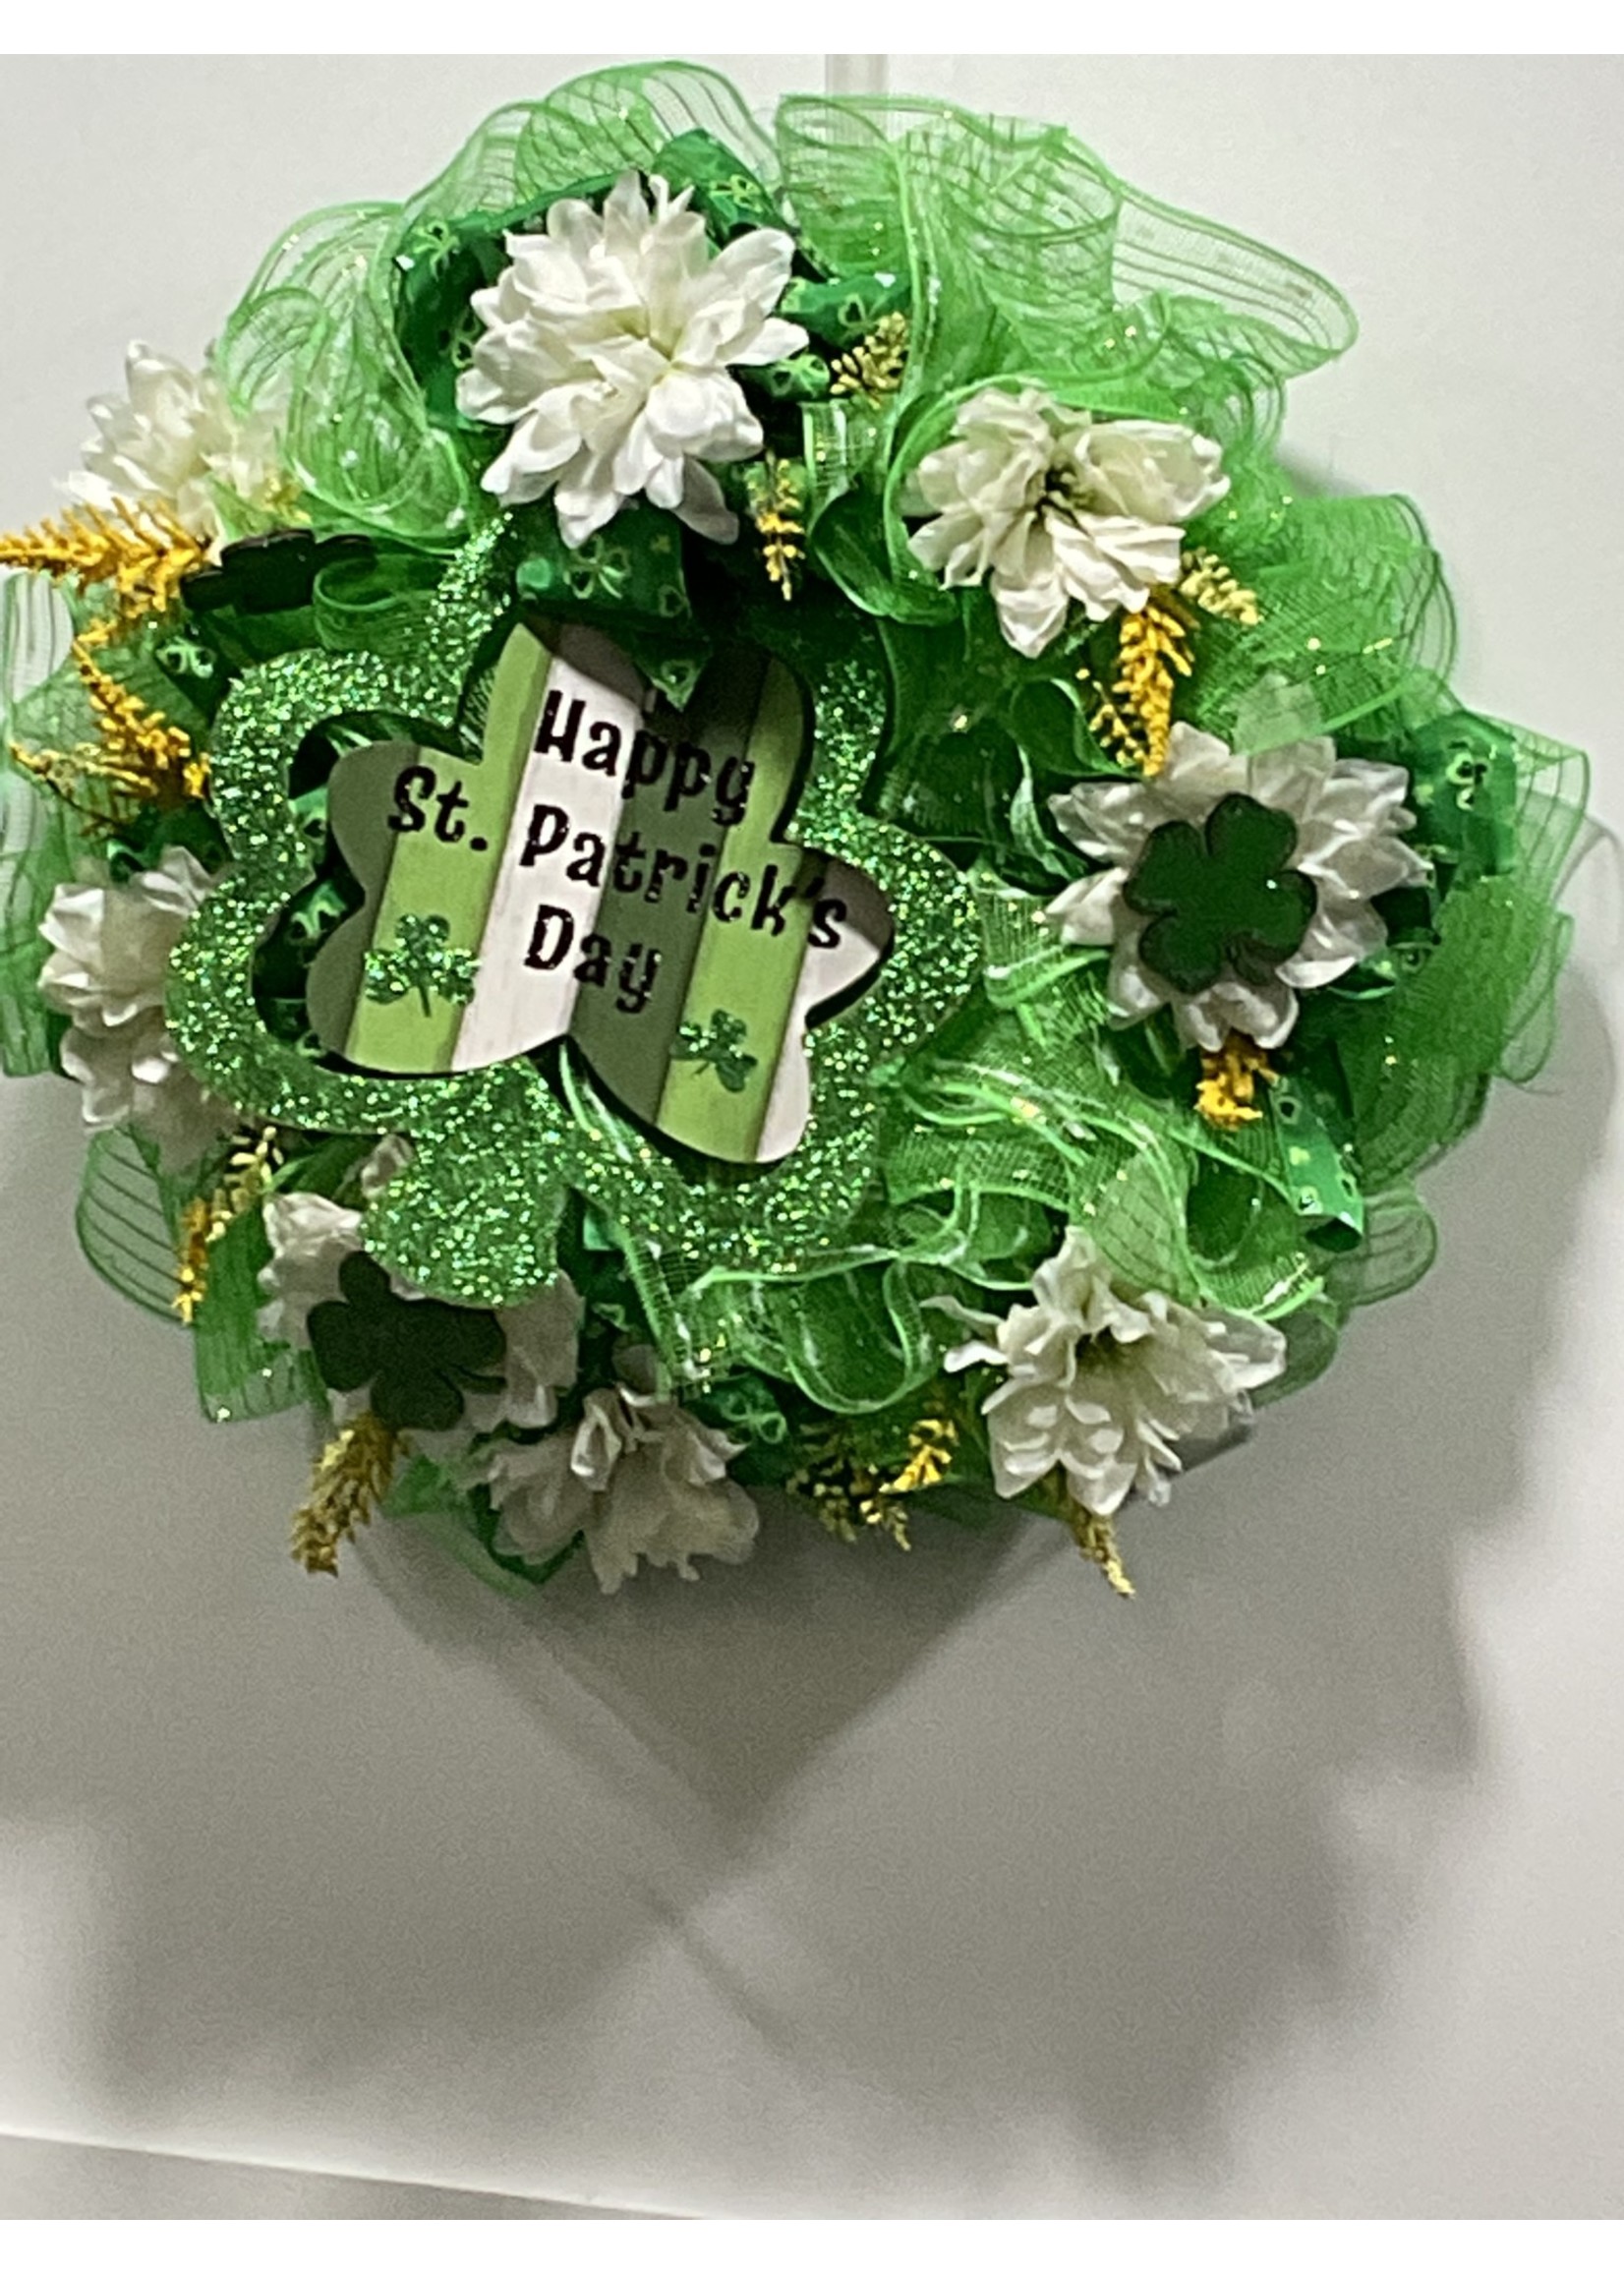 My New Favorite Thing Wreath Mesh 21 in-Bright Green White Flowers "Happy St Patrick's Day"